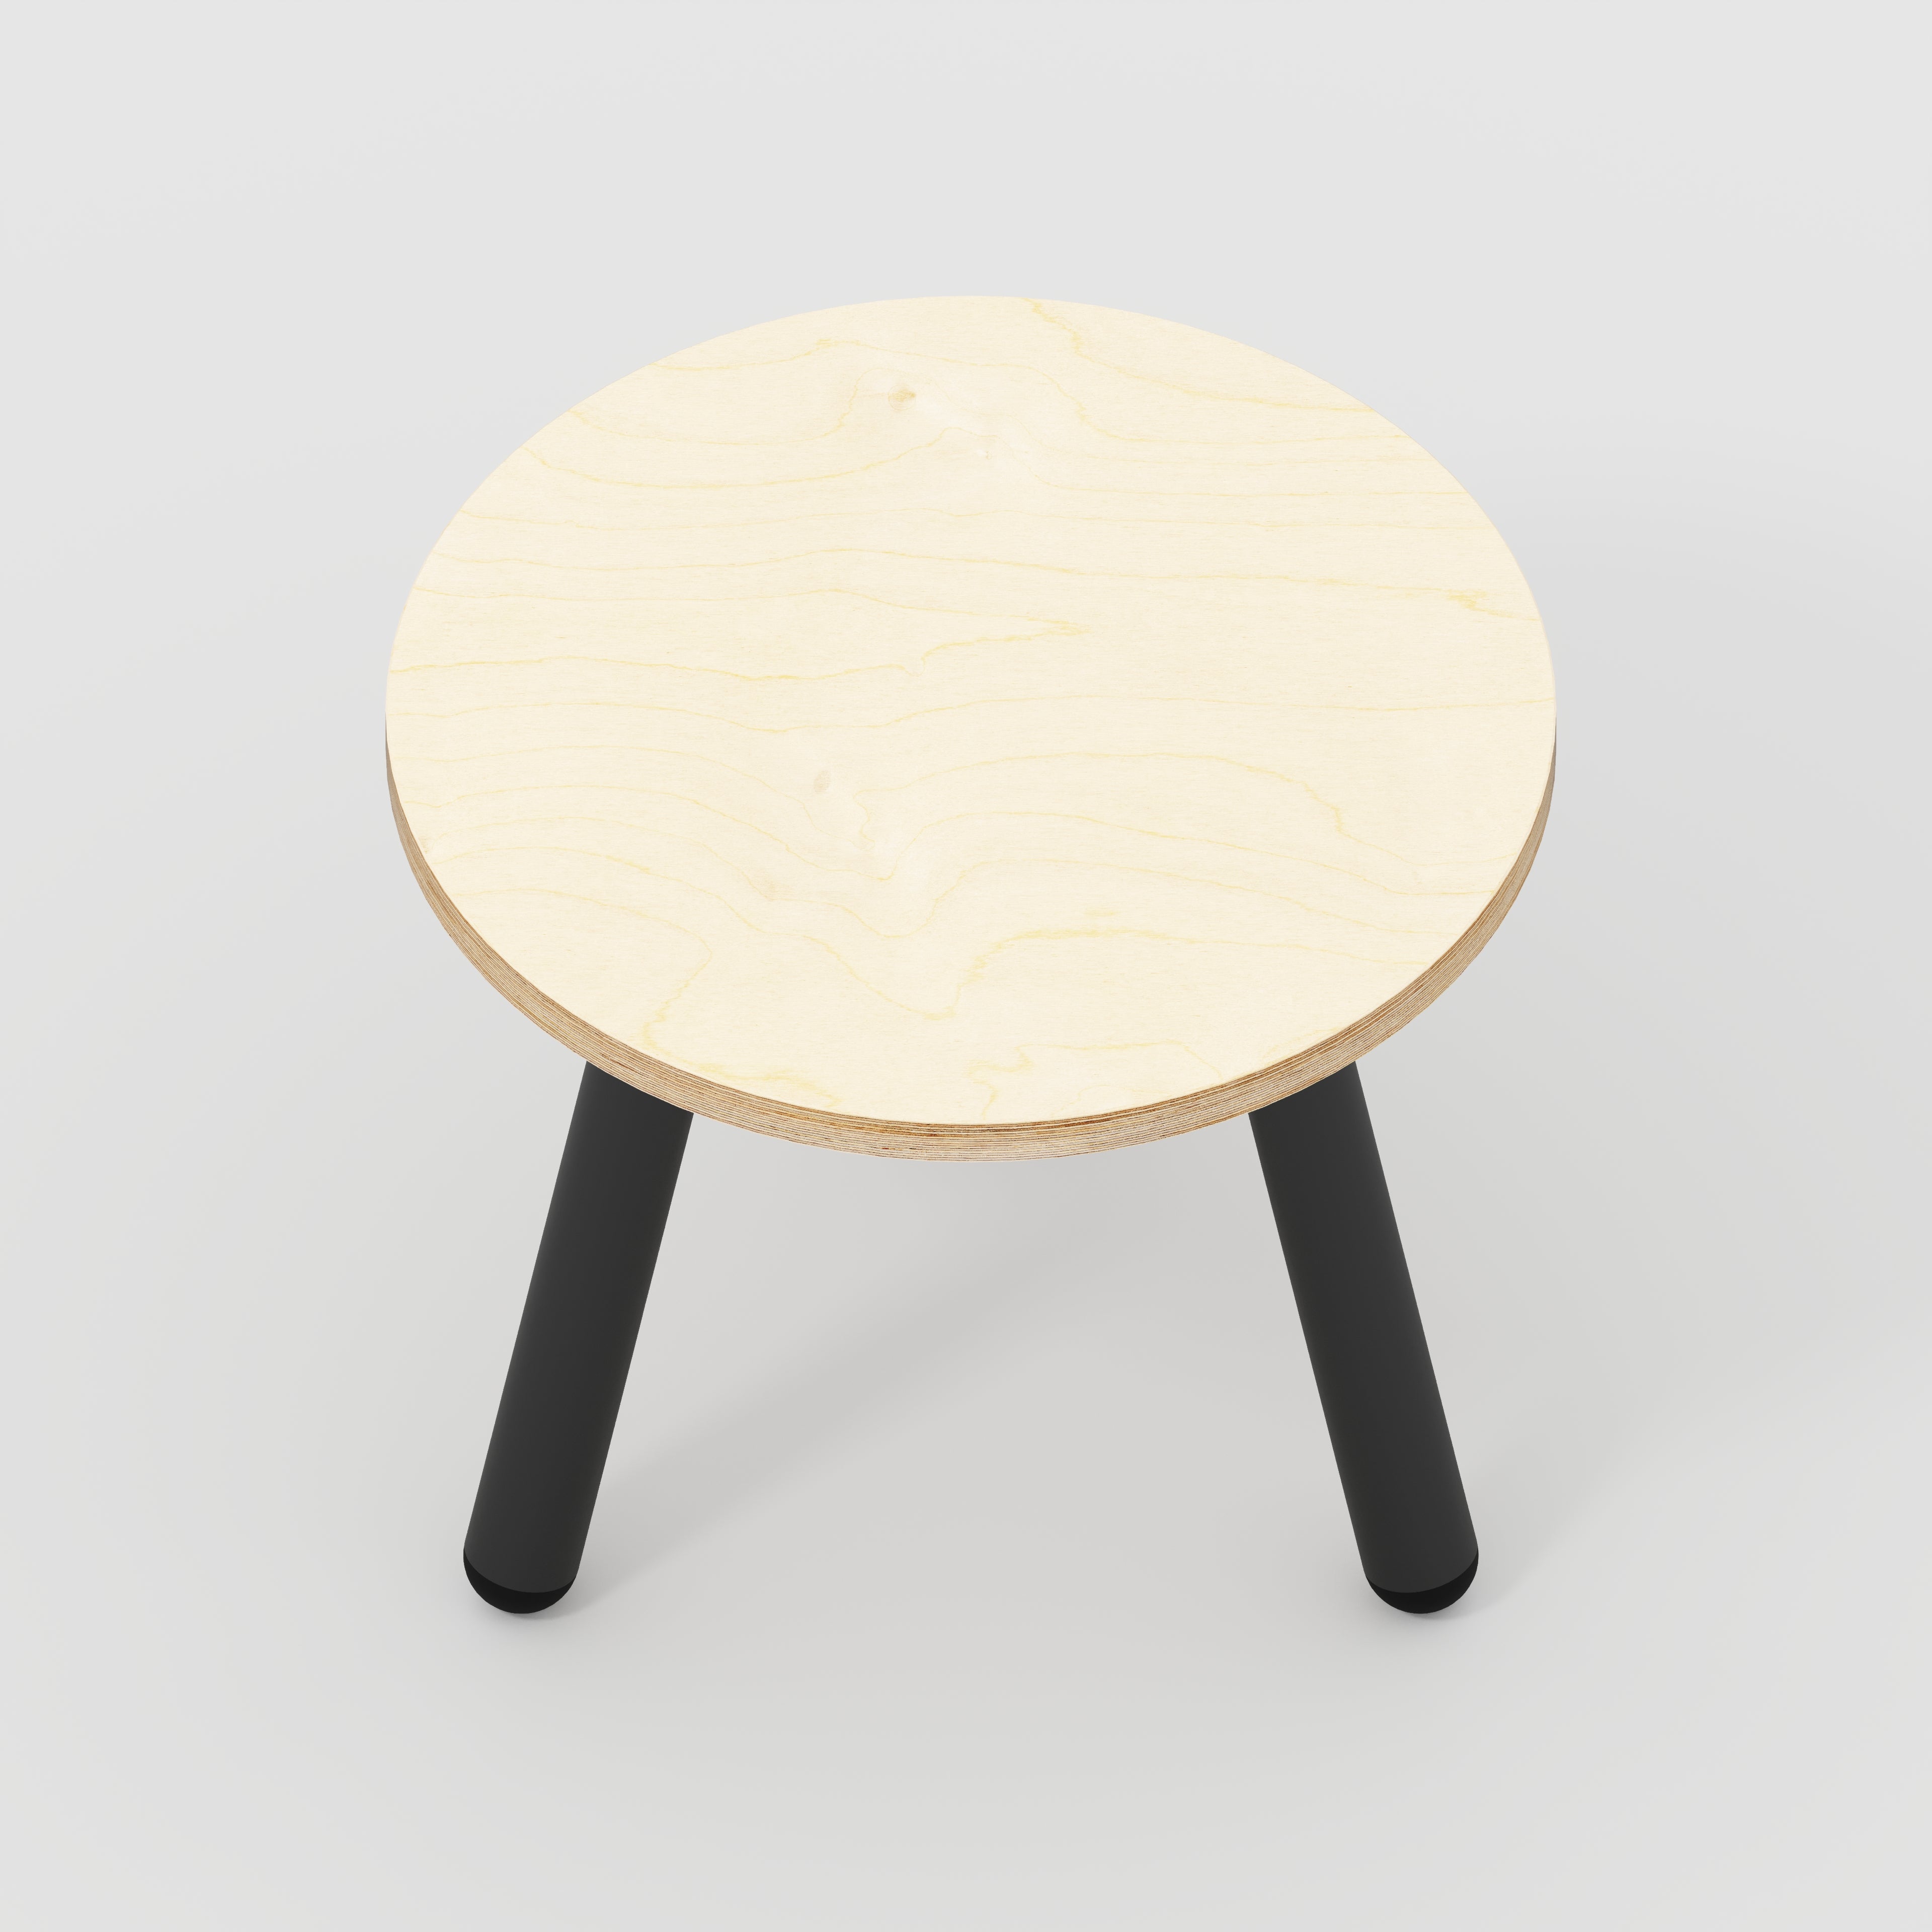 Round Side Table with Black Round Single Pin Legs - Plywood Birch - 500(w) x 500(d) x 425(h)